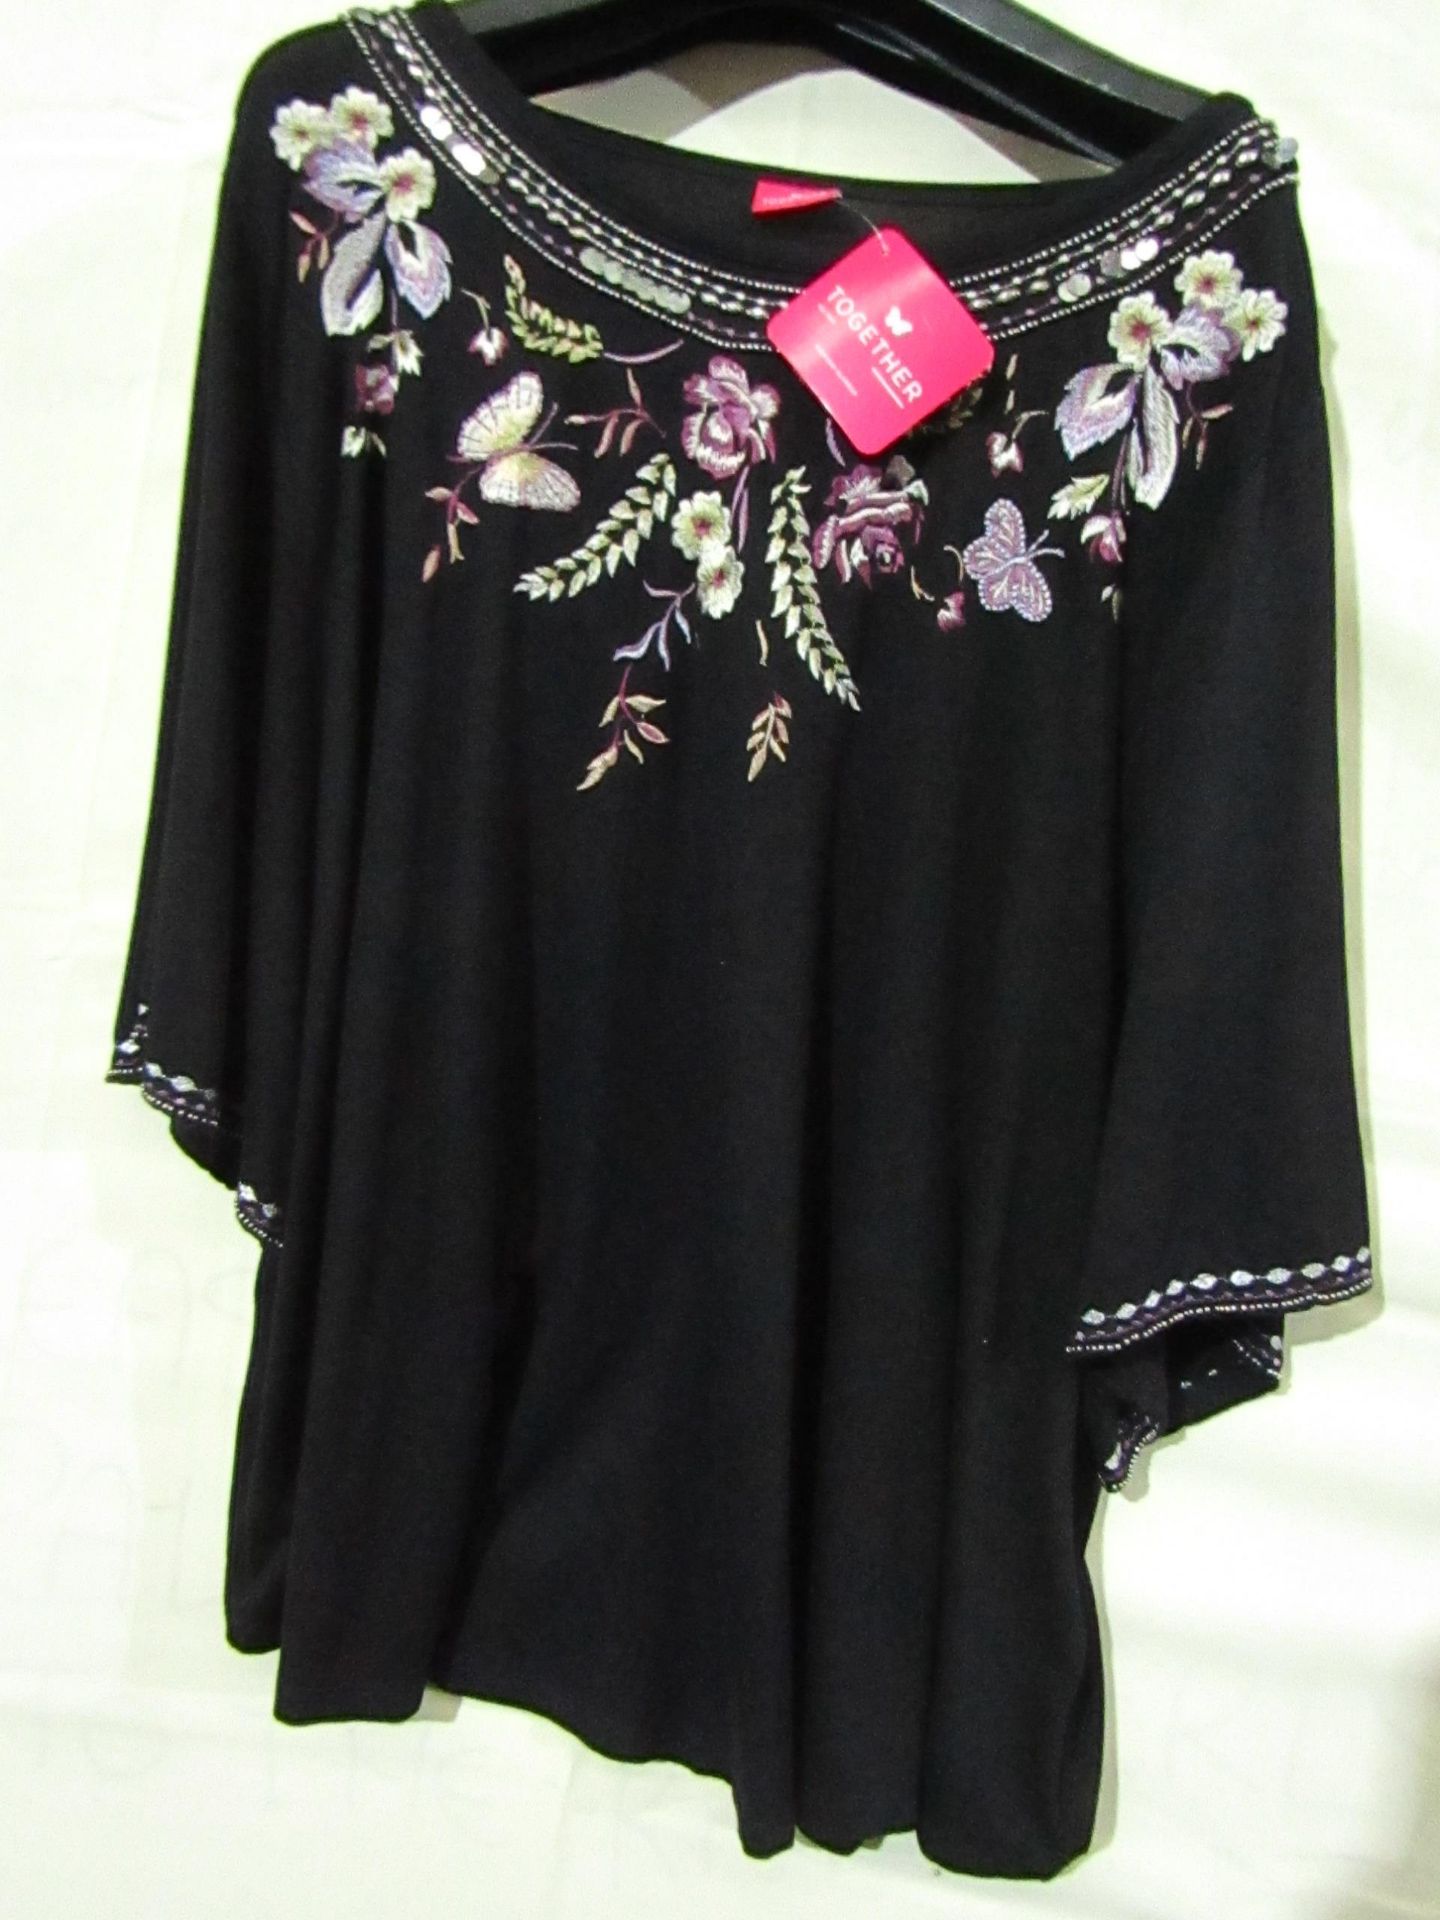 Together women's floral design Top, size 18, new and packaged.